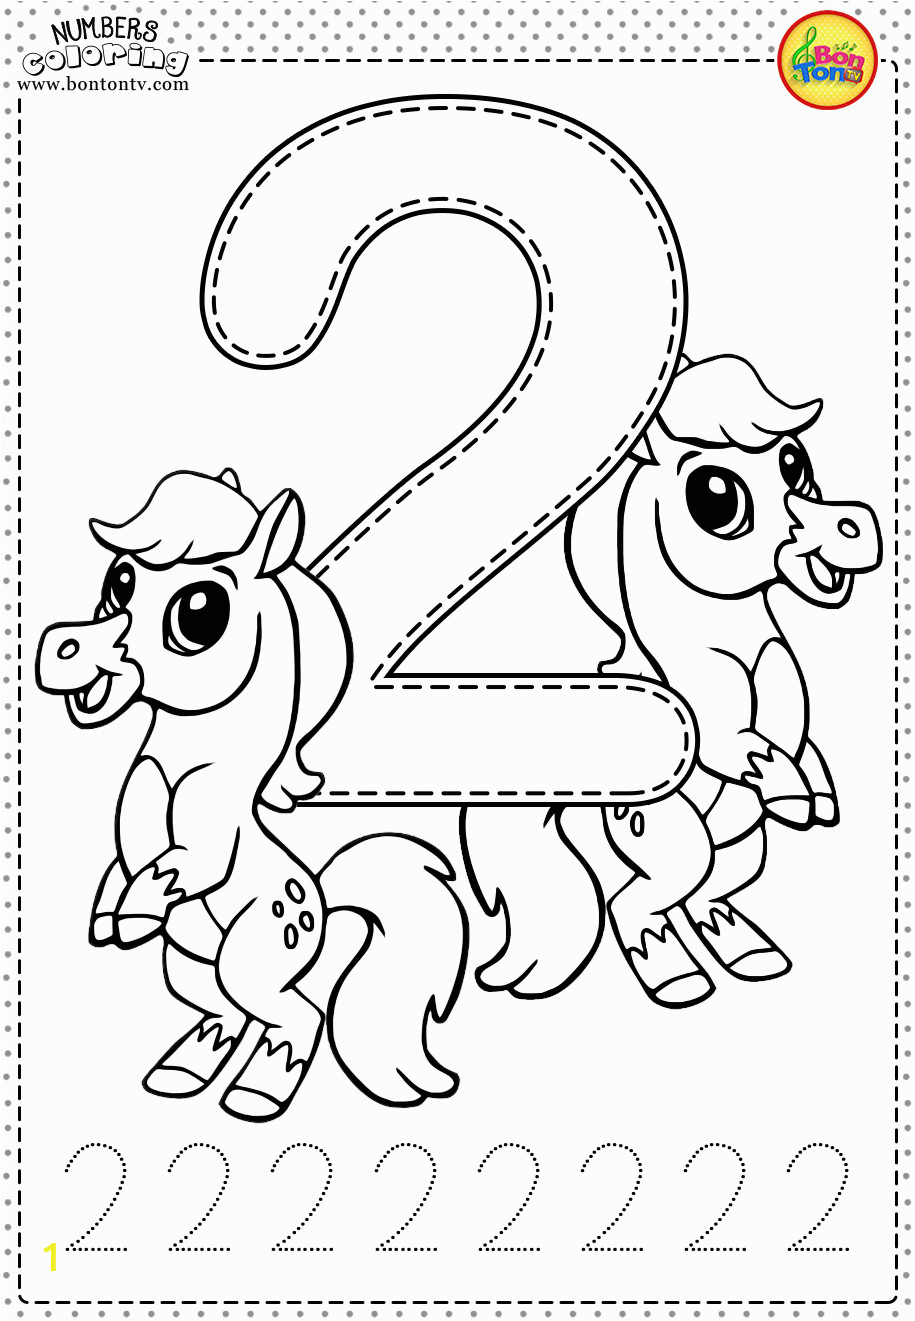 Coloring Pages Printables with Numbers Number 2 Preschool Printables Free Worksheets and